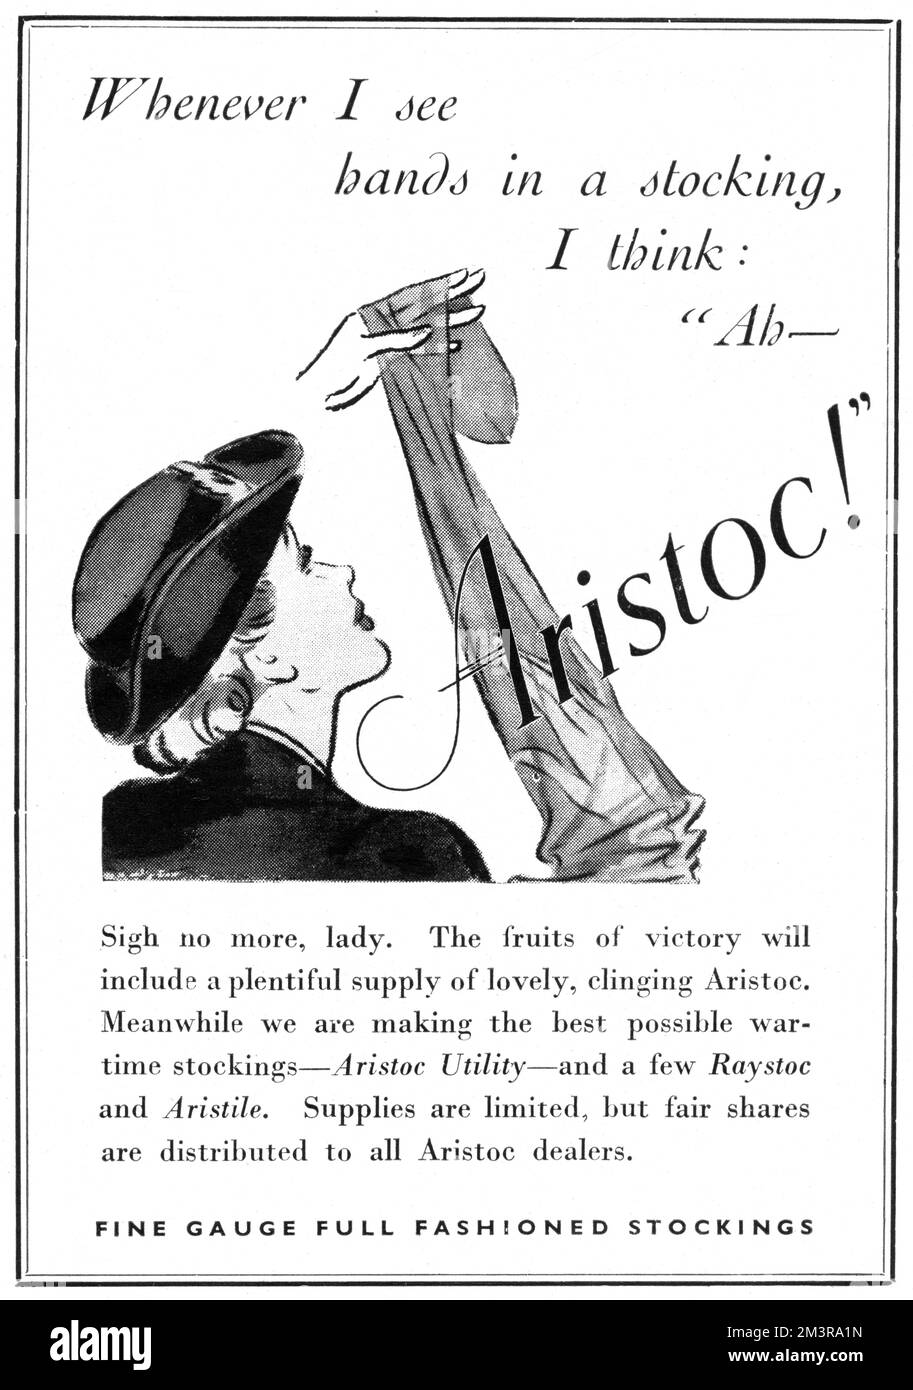 Advertisement for Aristoc stockings in 1944 showing a woman in WRNS uniform inspecting a pair.  The advert's copy promises that once victory has been achieved, 'a plentiful supply of lovely, clinging Aristoc' will be available.  For the time being though, women will have to make do with the 'best possible wartime stockings - Aristoc Utility' and a limited supply of Raystoc and Aristile brands.  Rayon was used for the majority of wartime stockings, with silk and nylon both hugely limited.     Date: 1944 Stock Photo